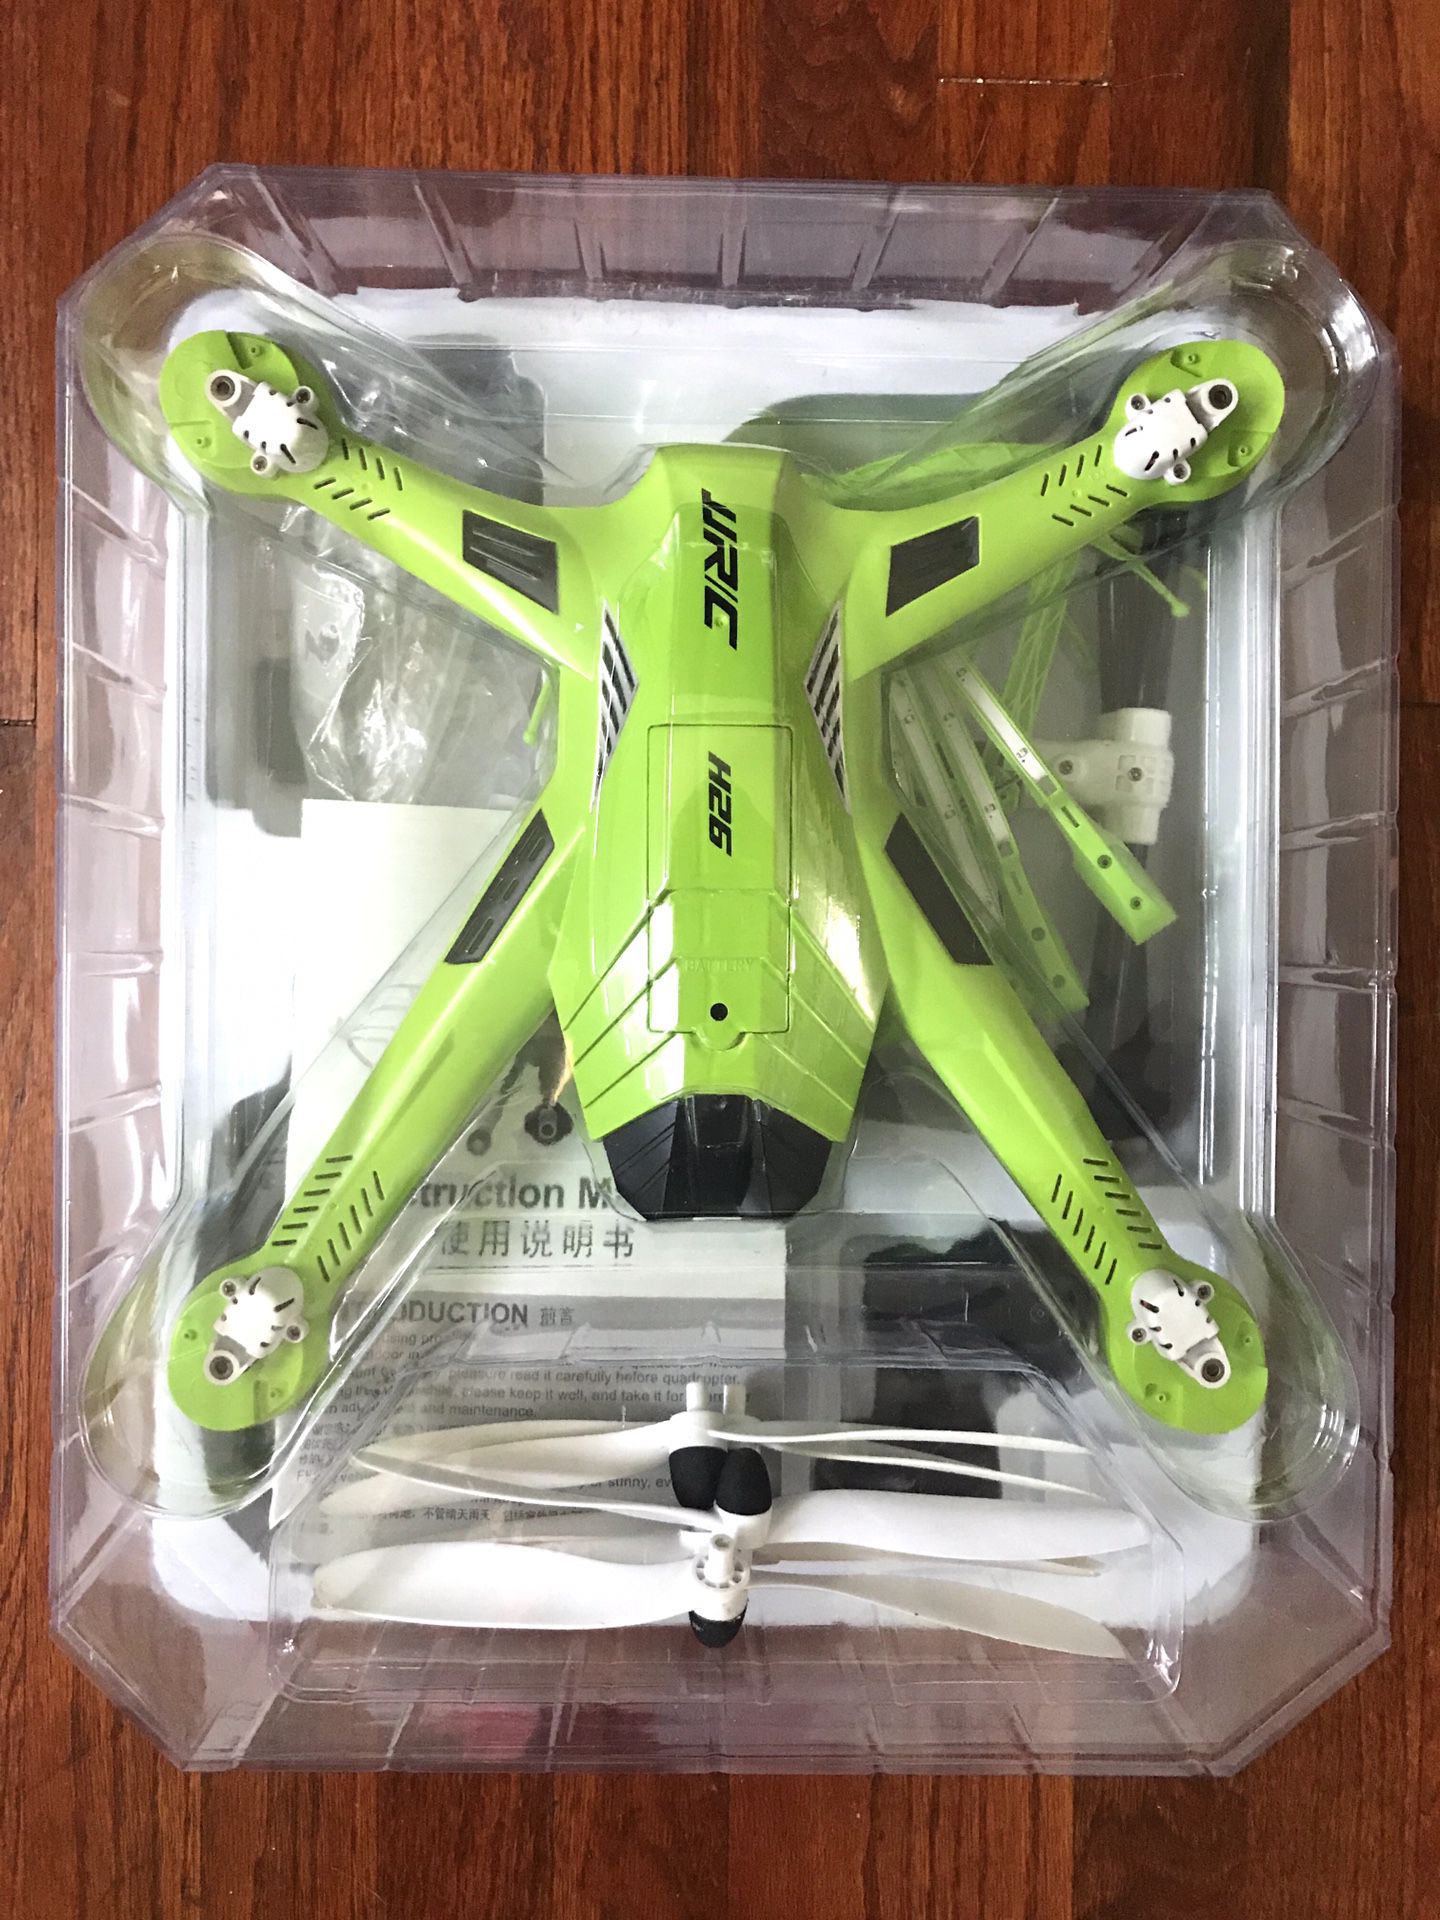 JJRC H26 2.4GHZ 6-Axis Gyro DRONE Brushed Motor